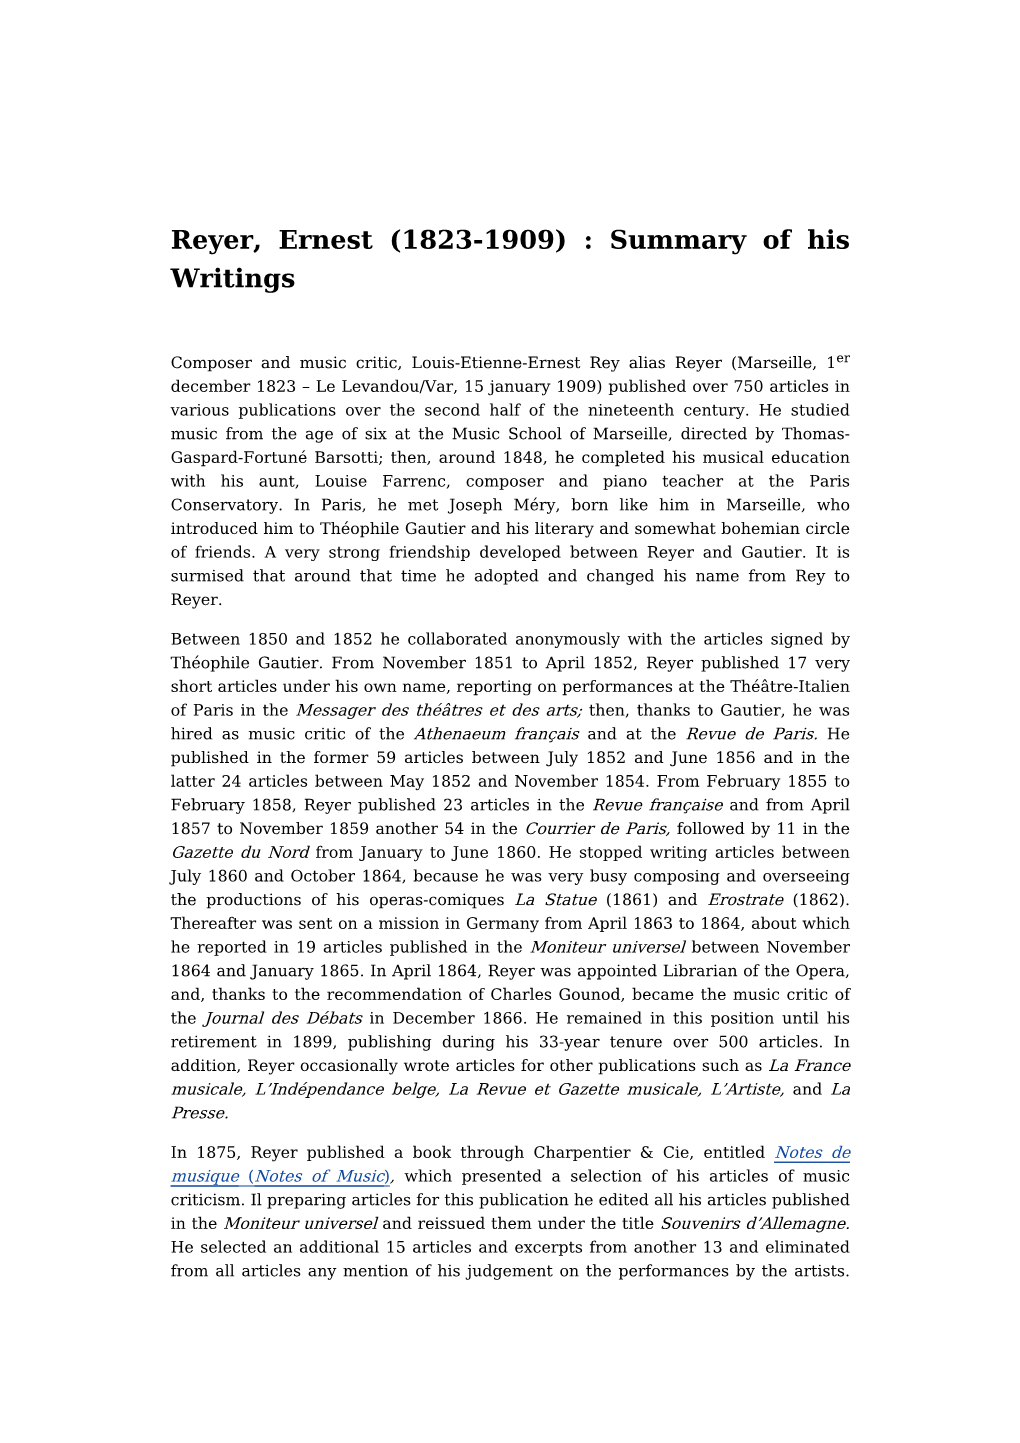 Reyer, Ernest (1823-1909) : Summary of His Writings